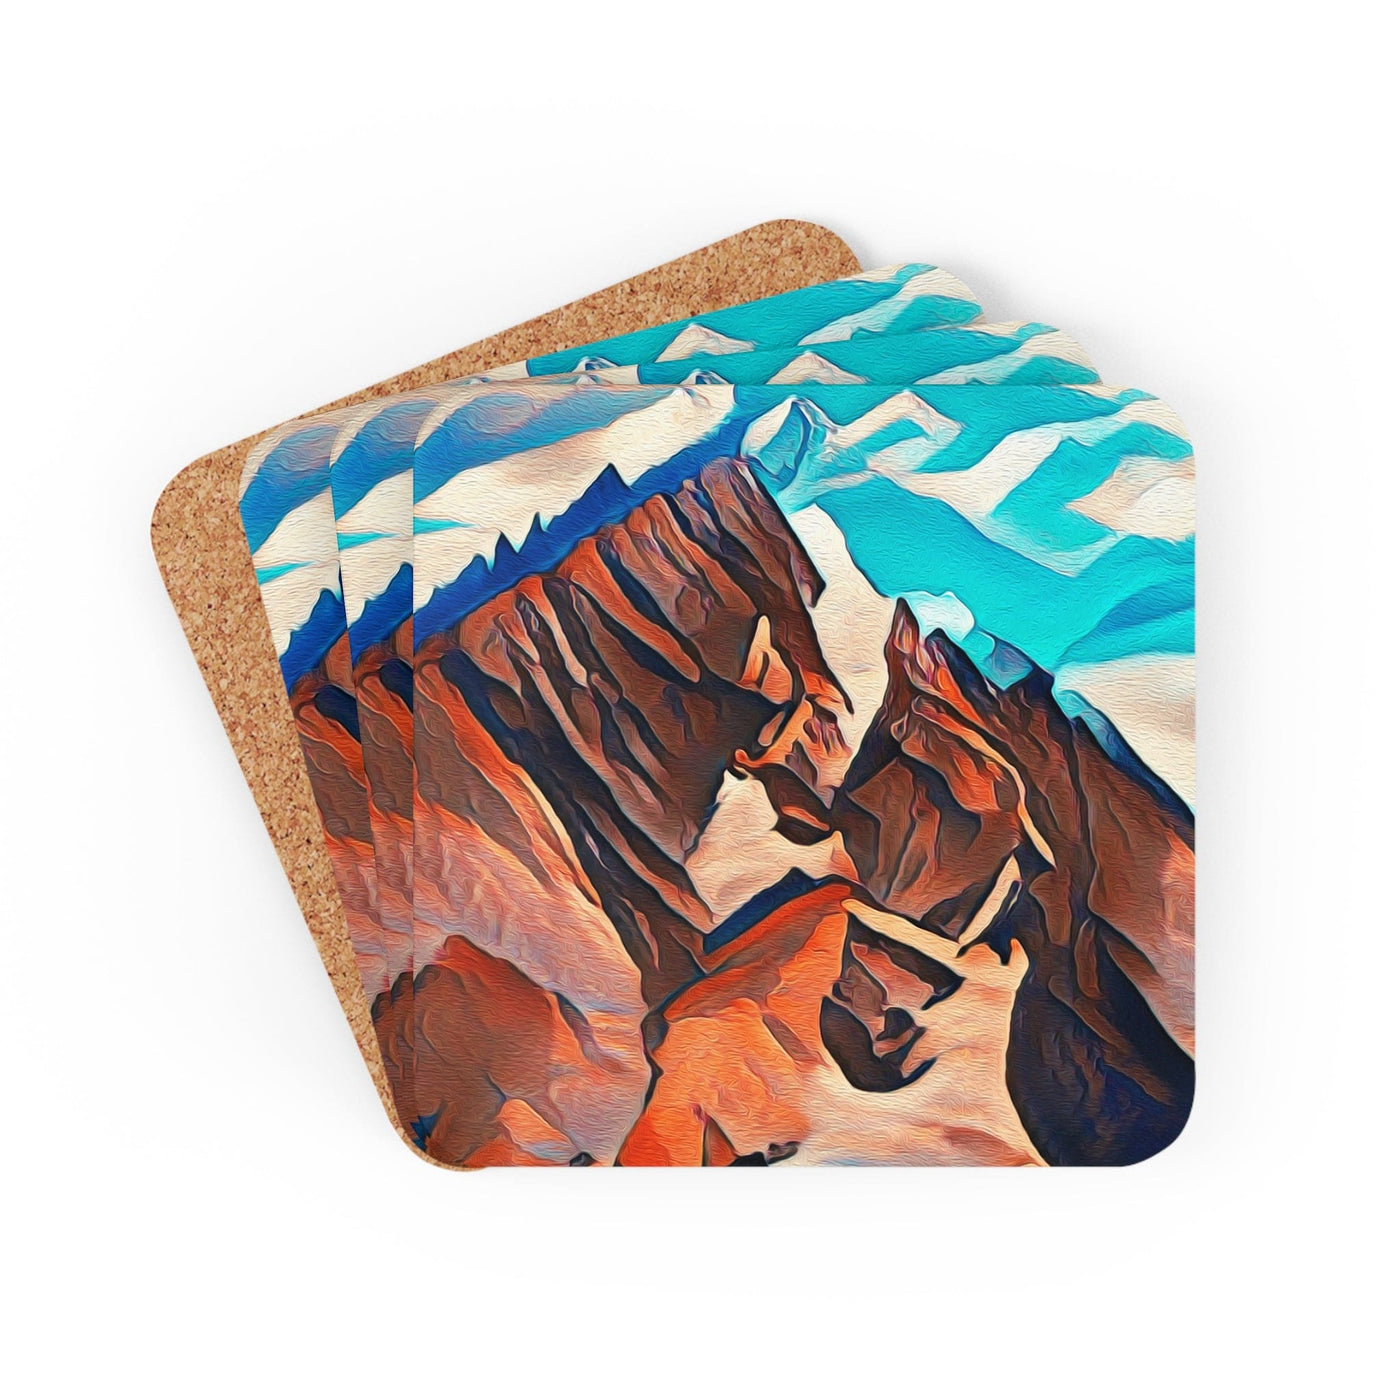 Handcrafted Square Coaster Set Of 4 For Drinks And Cups Brown Horses